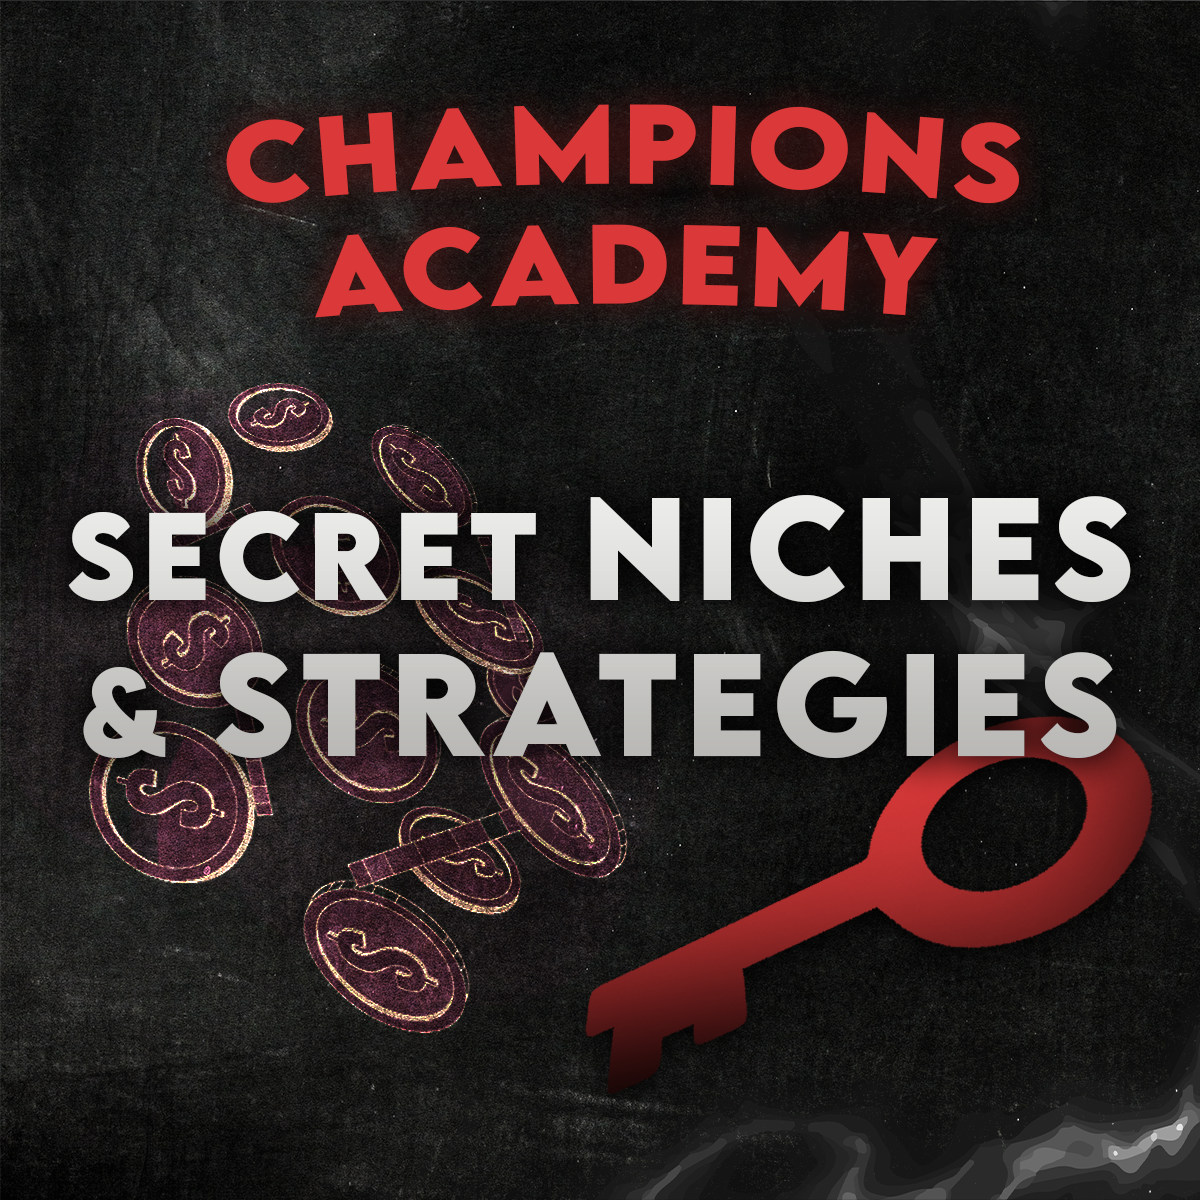 Secret Niches and Strategies Guide